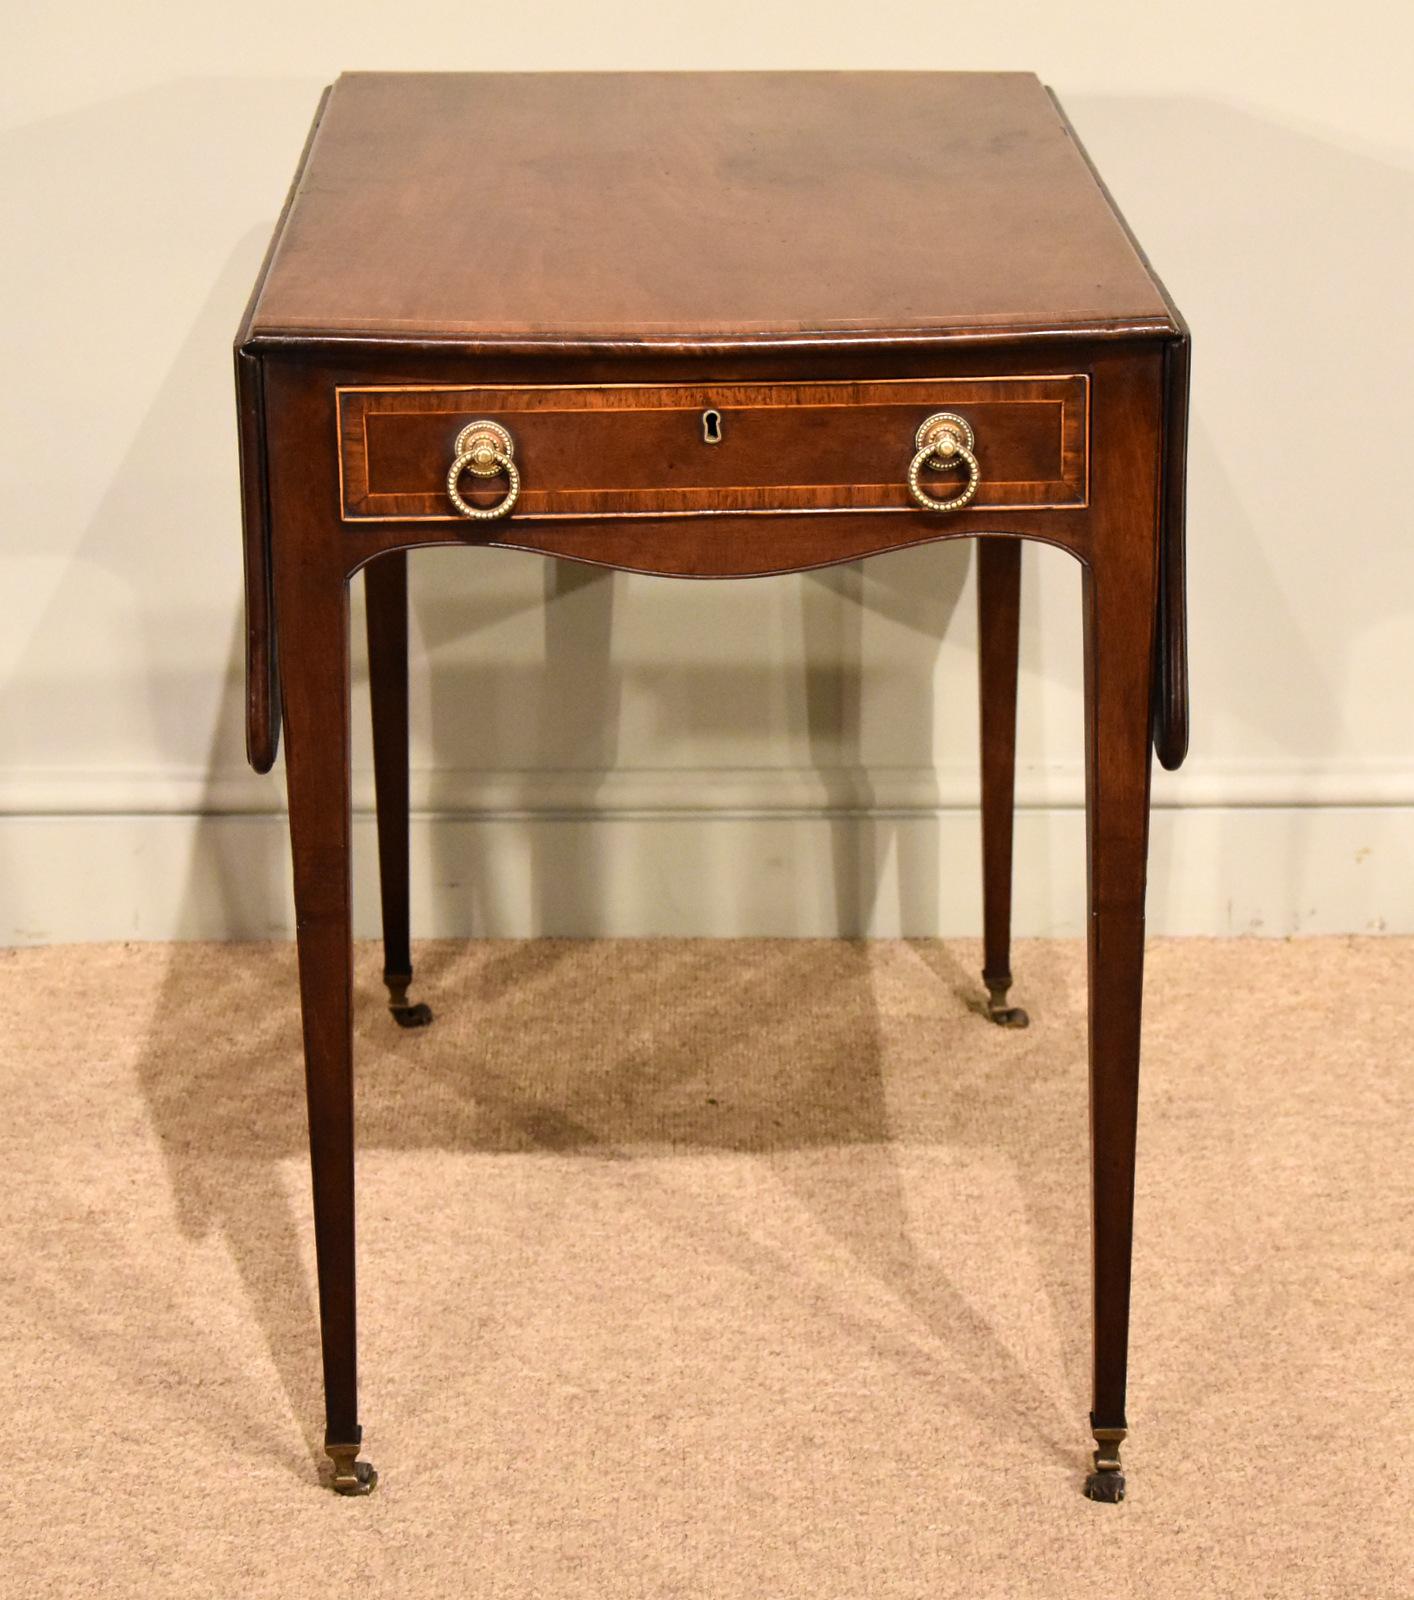 A very fine Hepplewhite fiddleback mahogany butterfly Pembroke table. Original handles leather casters and brass caps. Great color and patina

Measures: Height 28